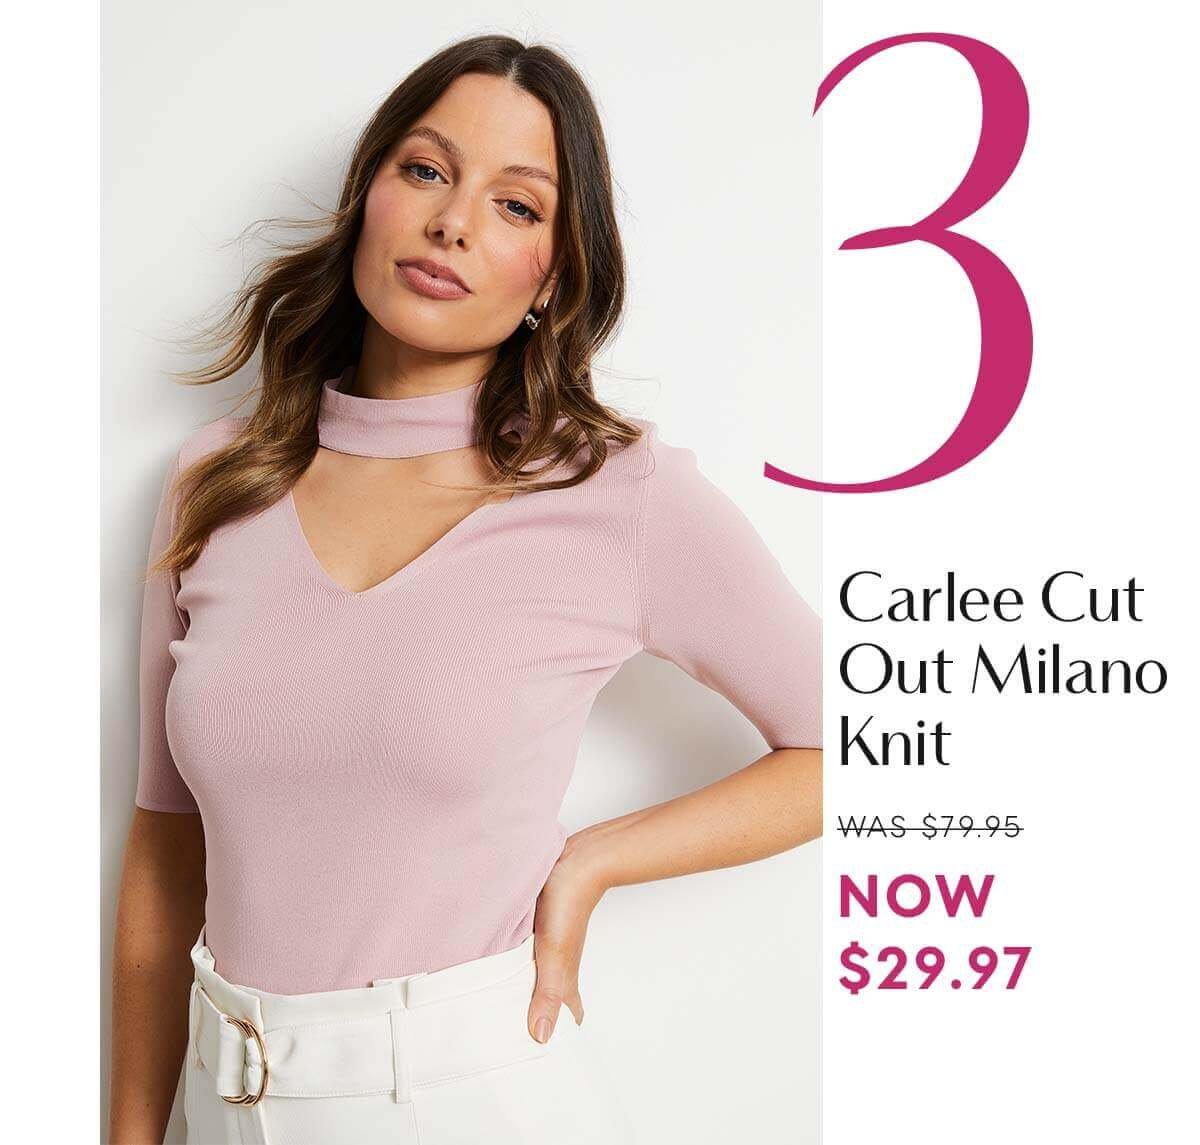 3. Carlee cut out Milano knit was $79.95 now $29.97